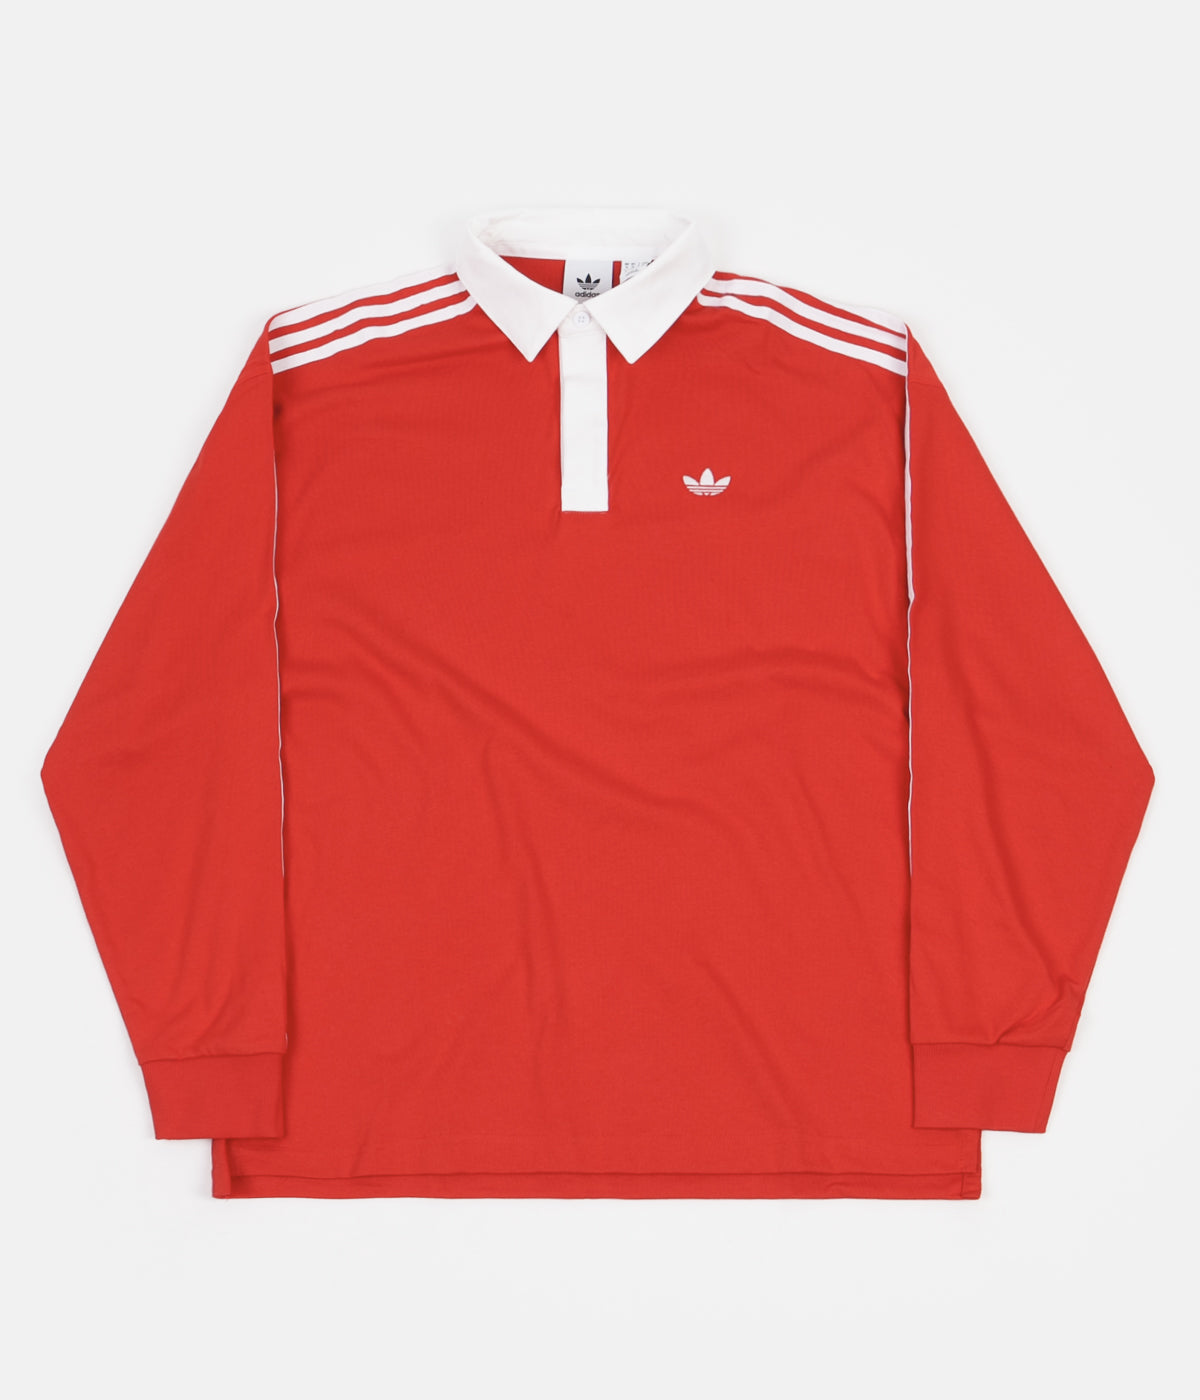 Adidas Solid Rugby Shirt - Vivid Red / White | Mnje